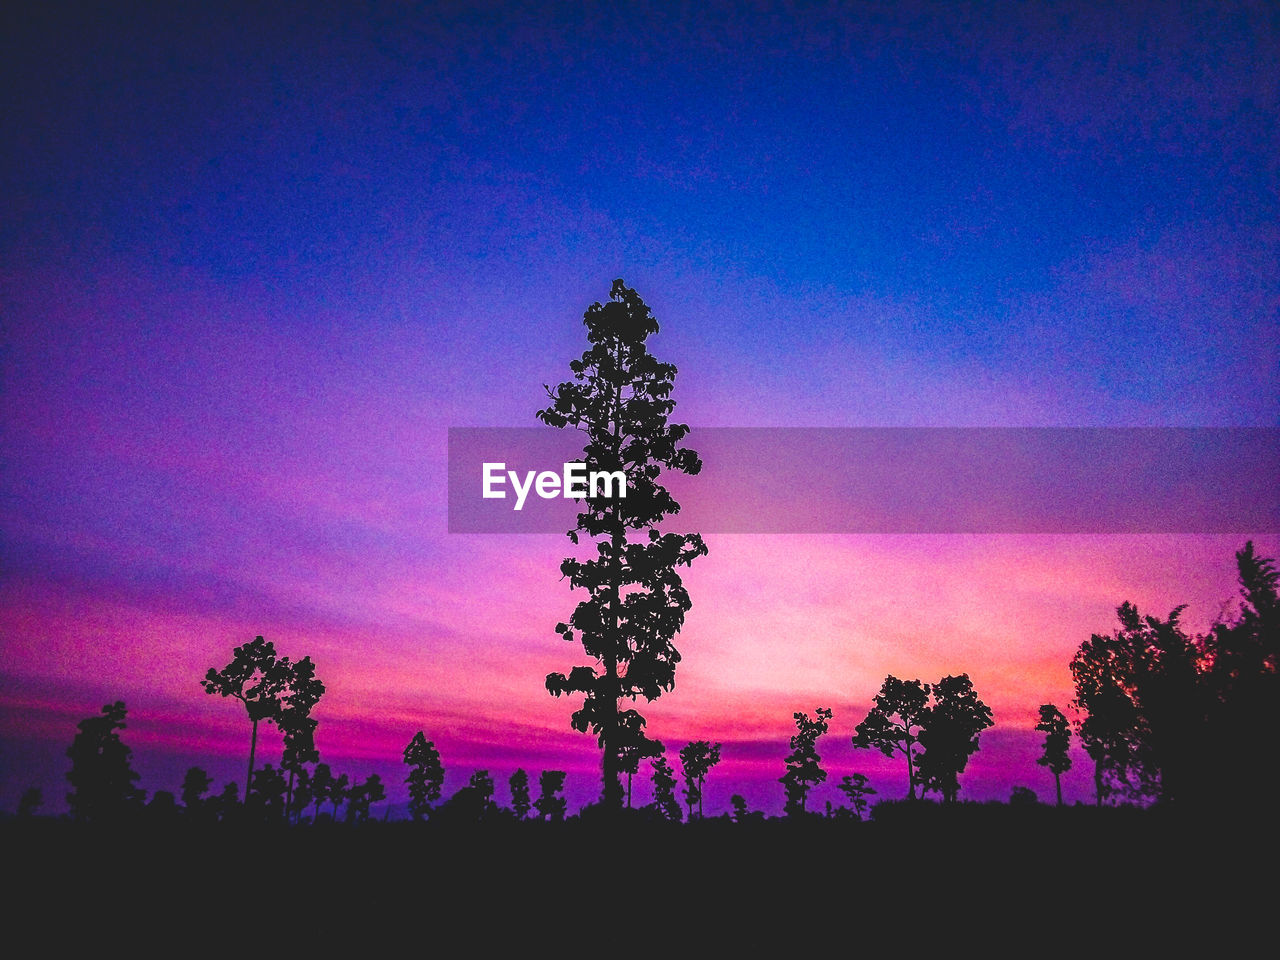 SILHOUETTE TREE ON FIELD AGAINST SKY DURING SUNSET